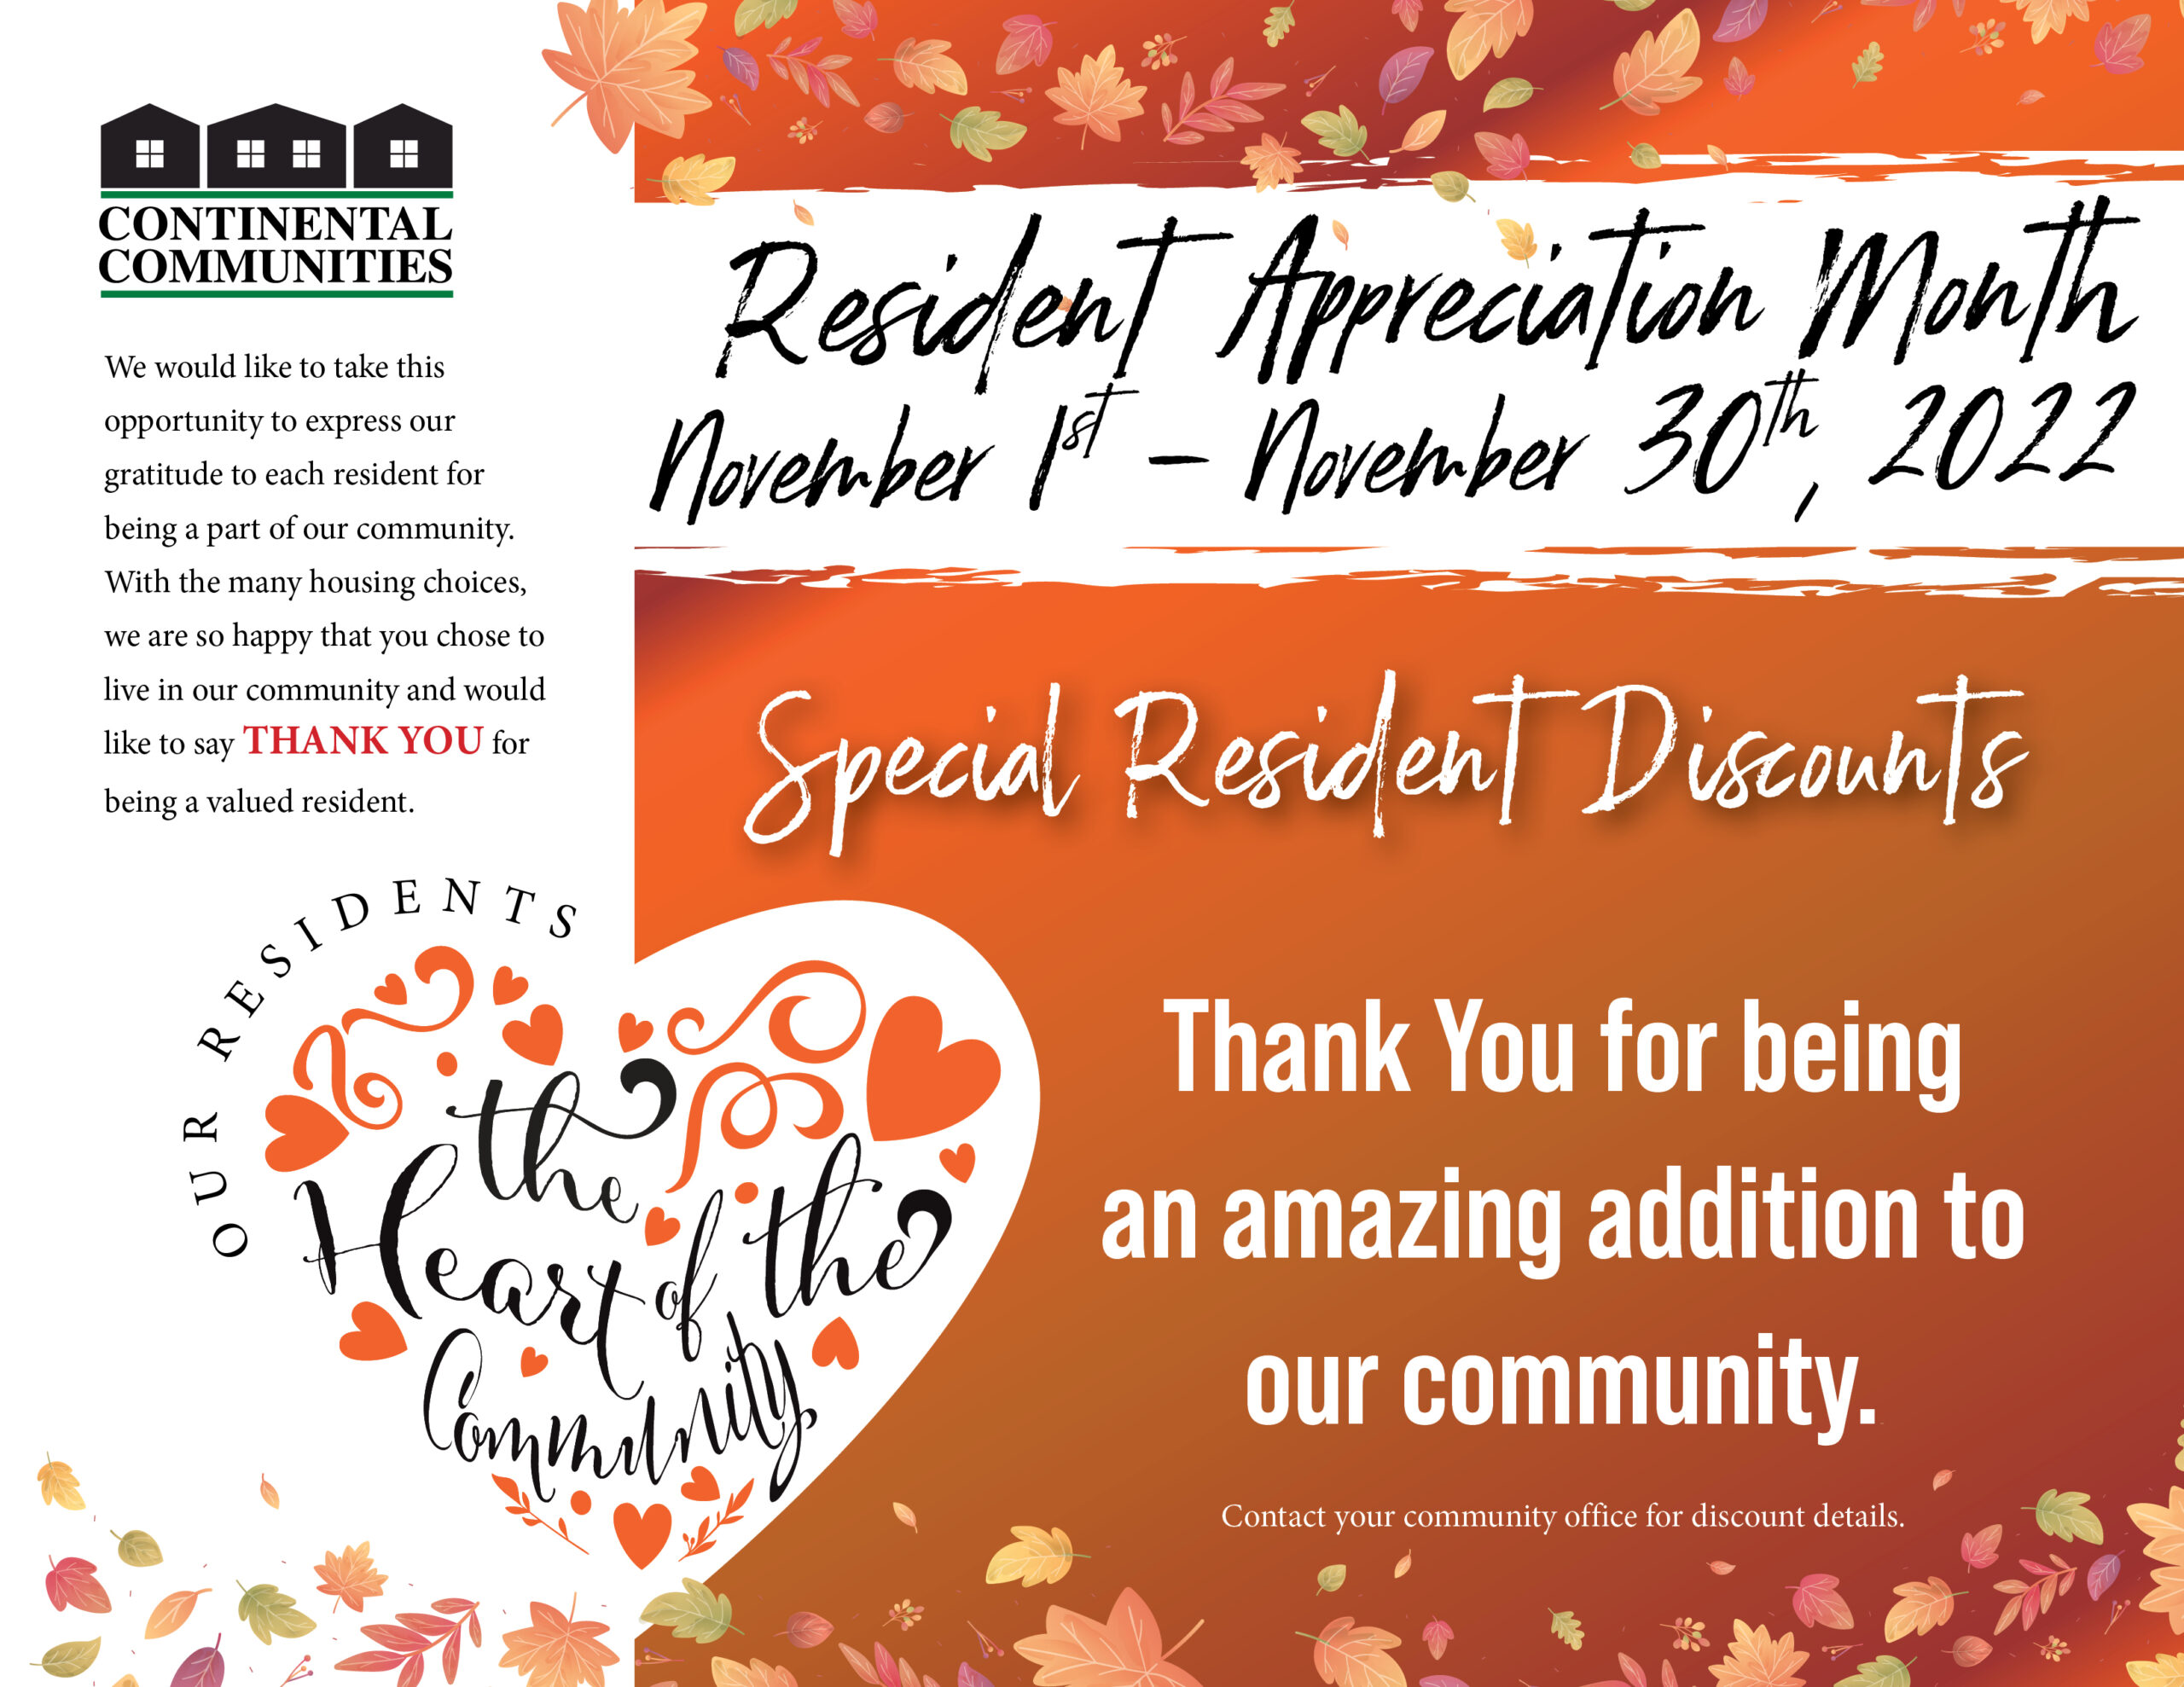 Continental Communities logo We would like to take this opportunity to express our gratitude to each resident for being a part of our community. With many housing choice, we are happy that you chose to live in our community and would like to say THANK YOU for being a valued resident. Our residents - the heart of the community resident Appreciation Month November 1st-November 30th, 2022 Special Resident Discounts Thank You for being an amazing addition to out community. Contact your community office for discount details.